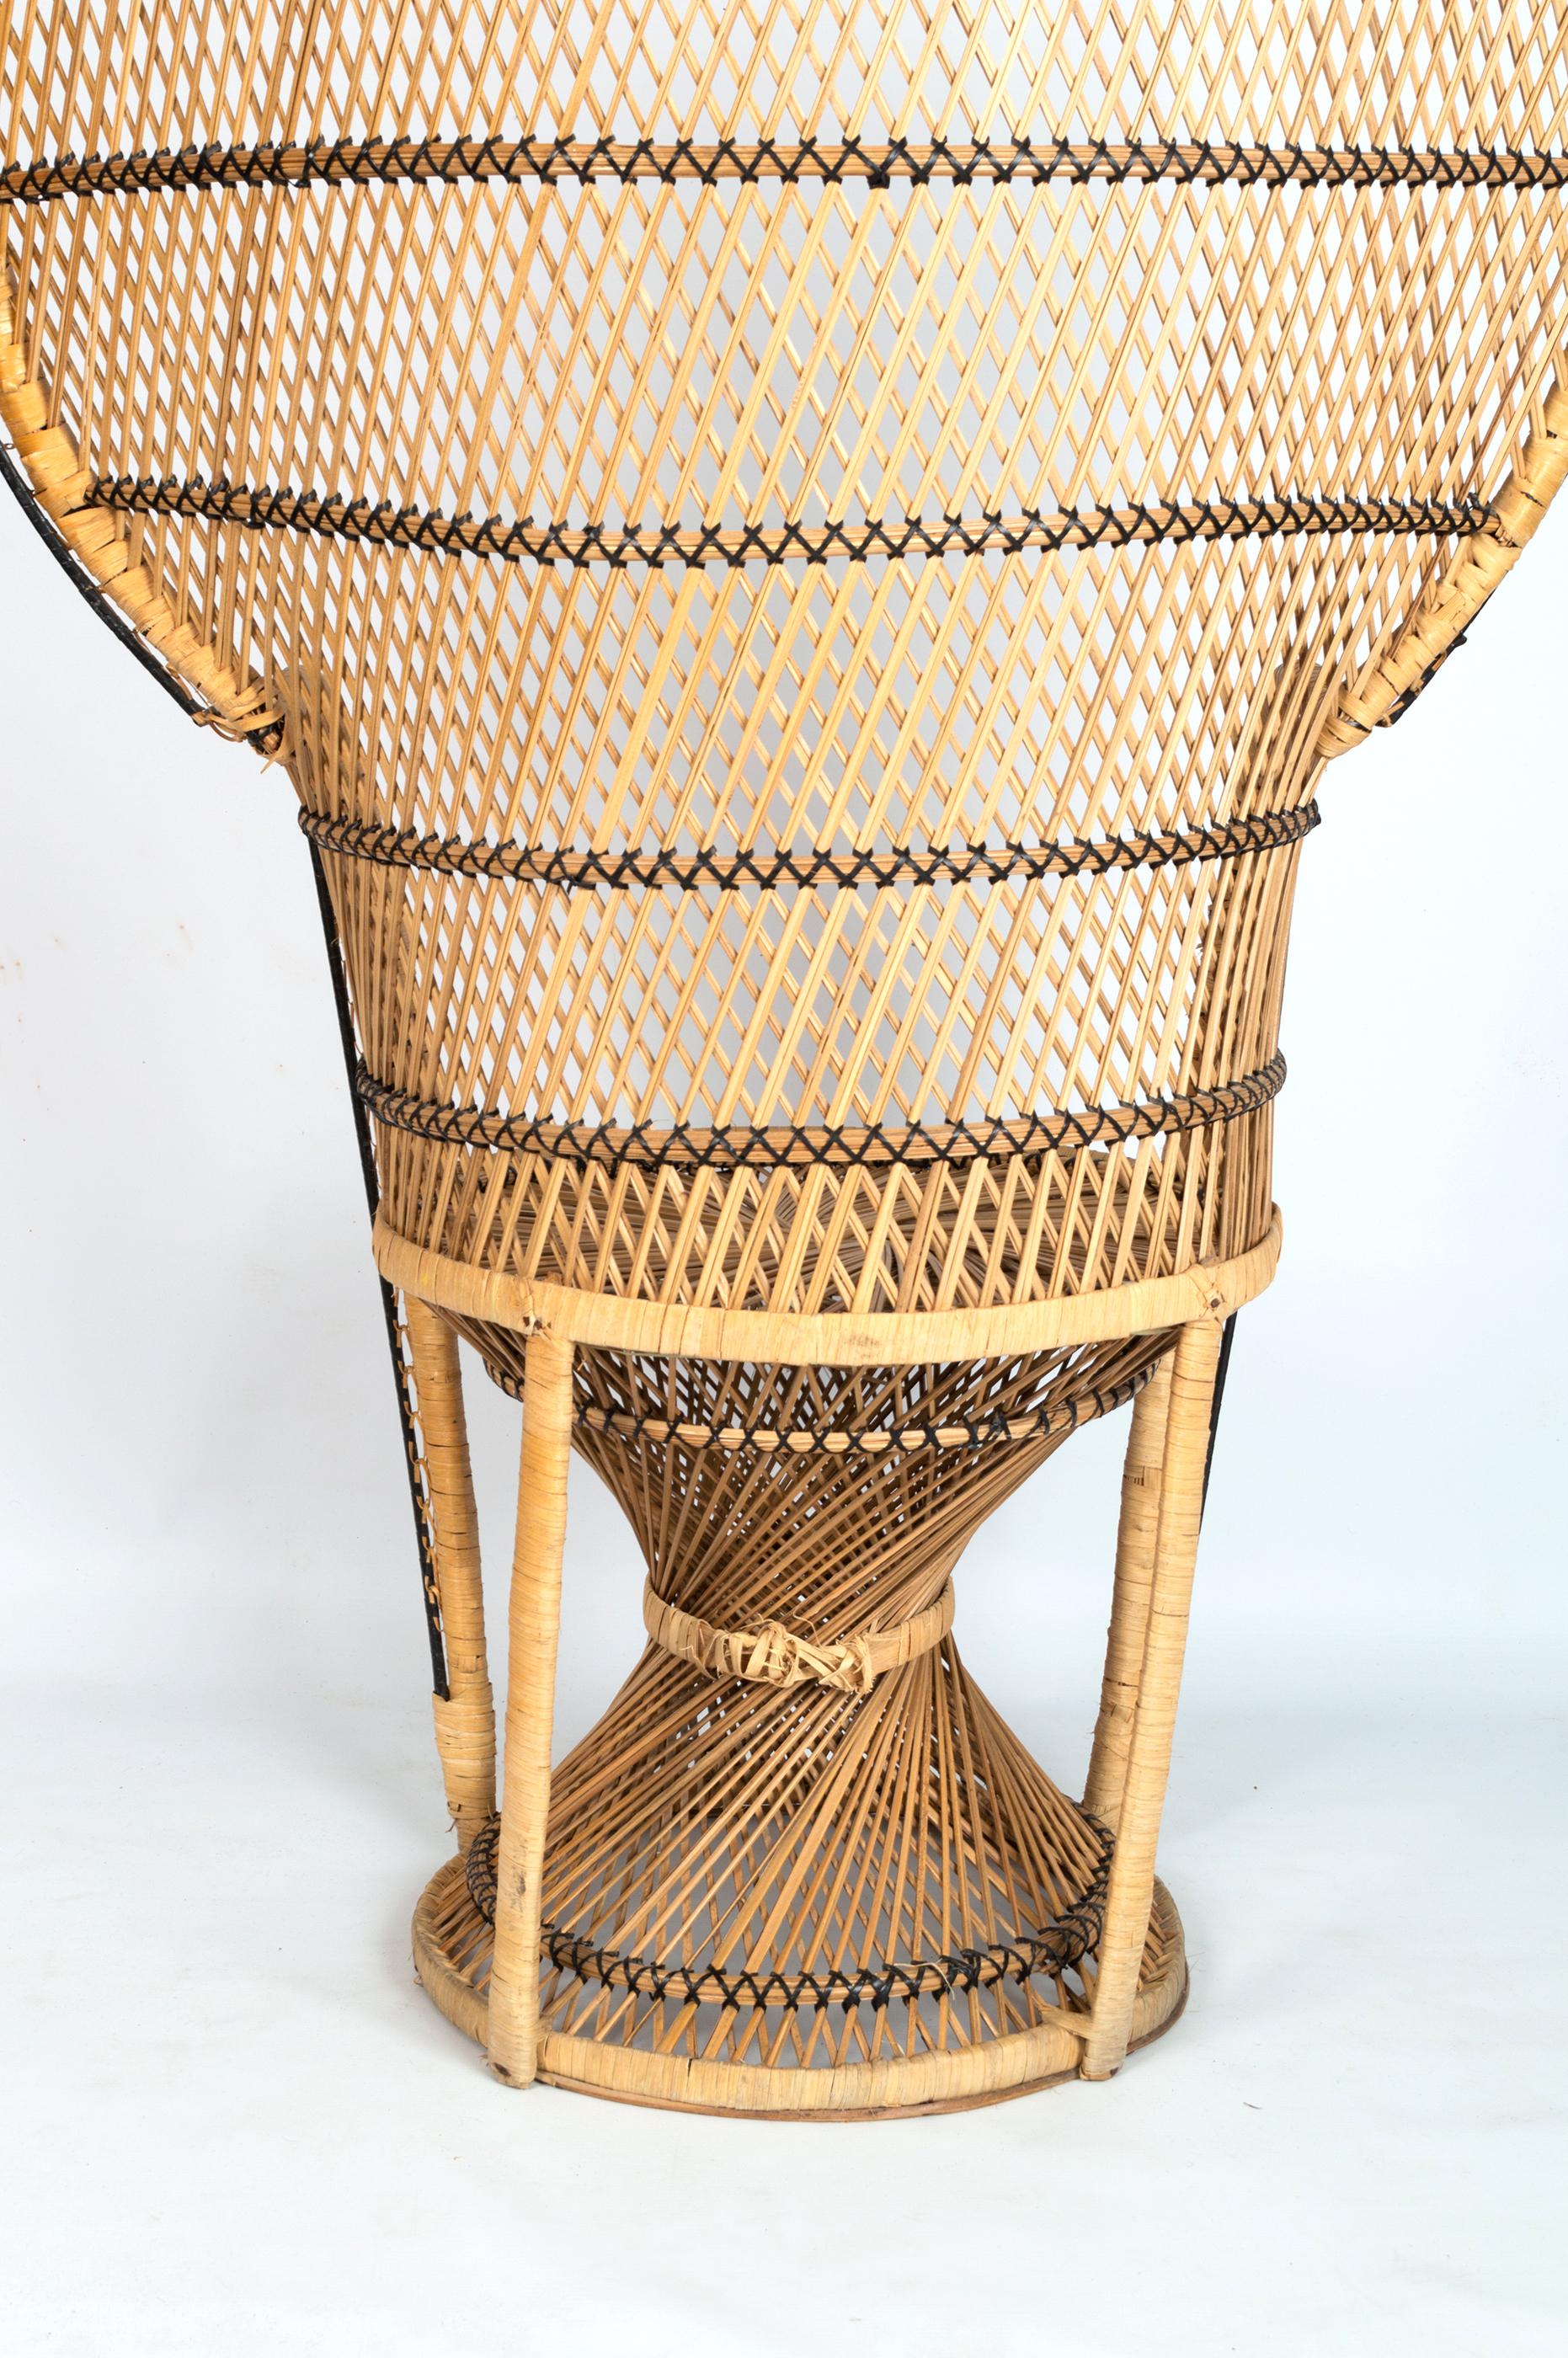 20th Century Mid Century Emmanuel Peacock Wicker Rattan Chair. C.1960 Italy For Sale